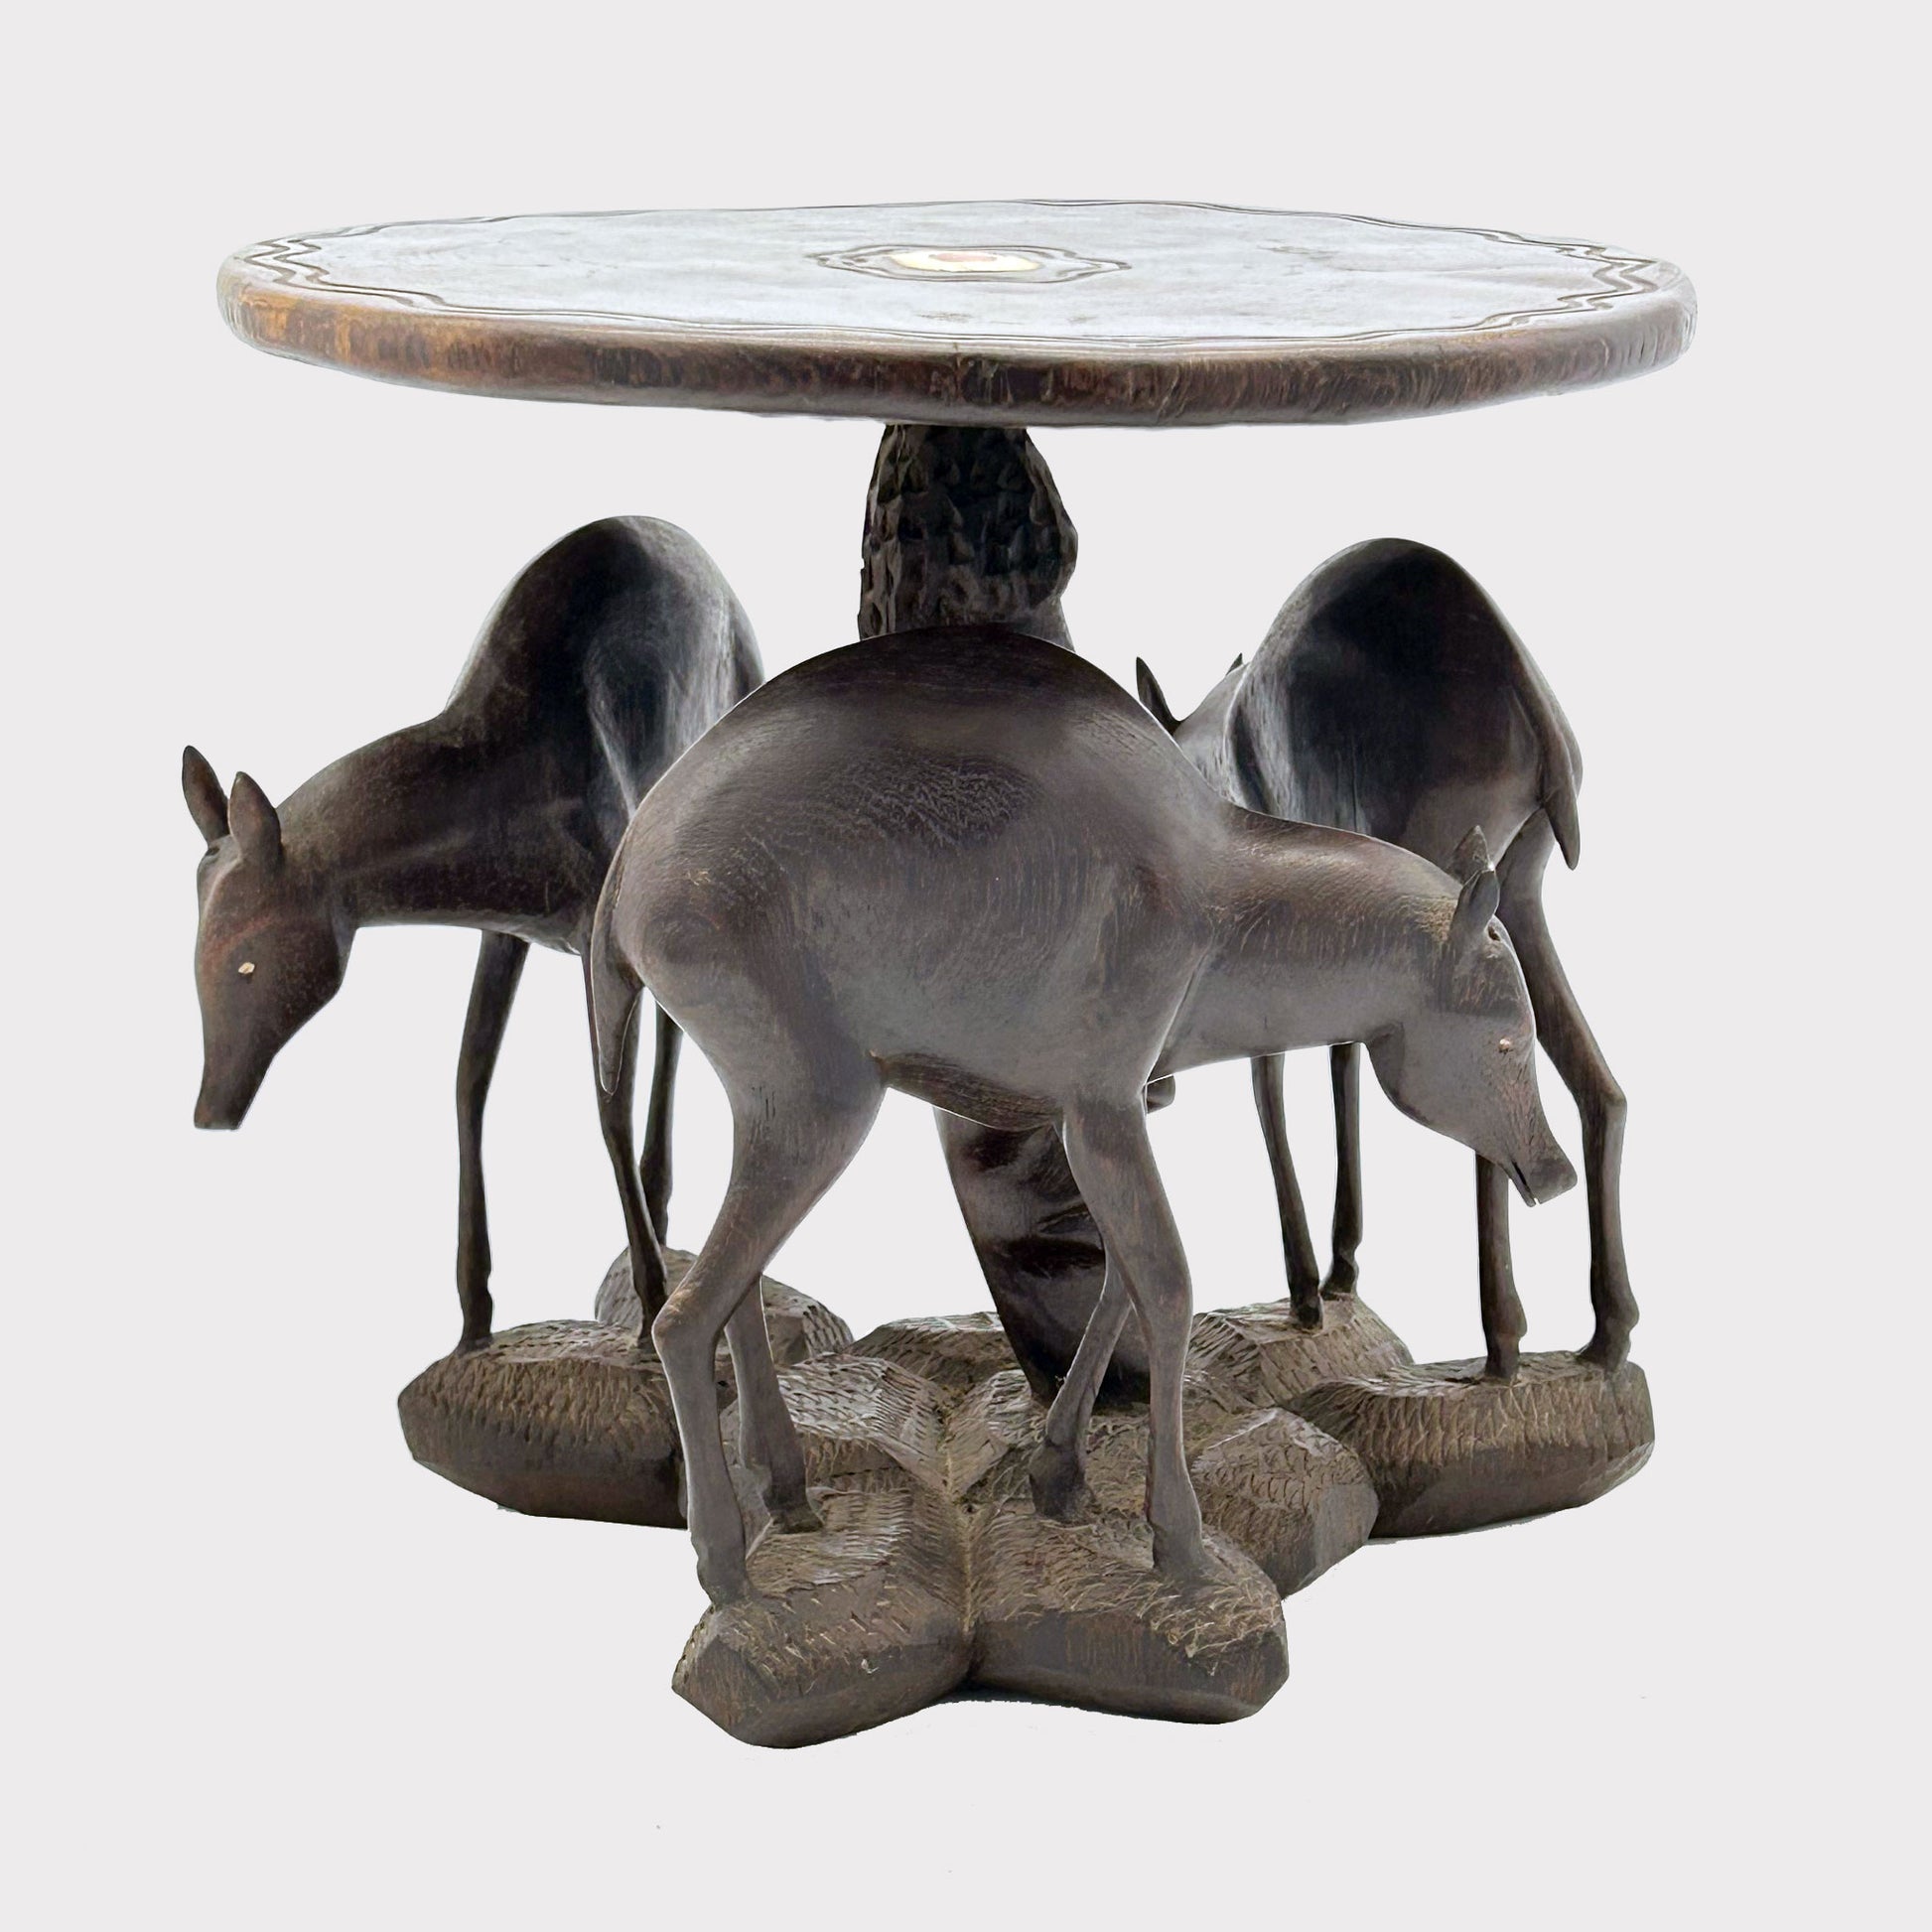 unique table features intricate details of an African face and deer